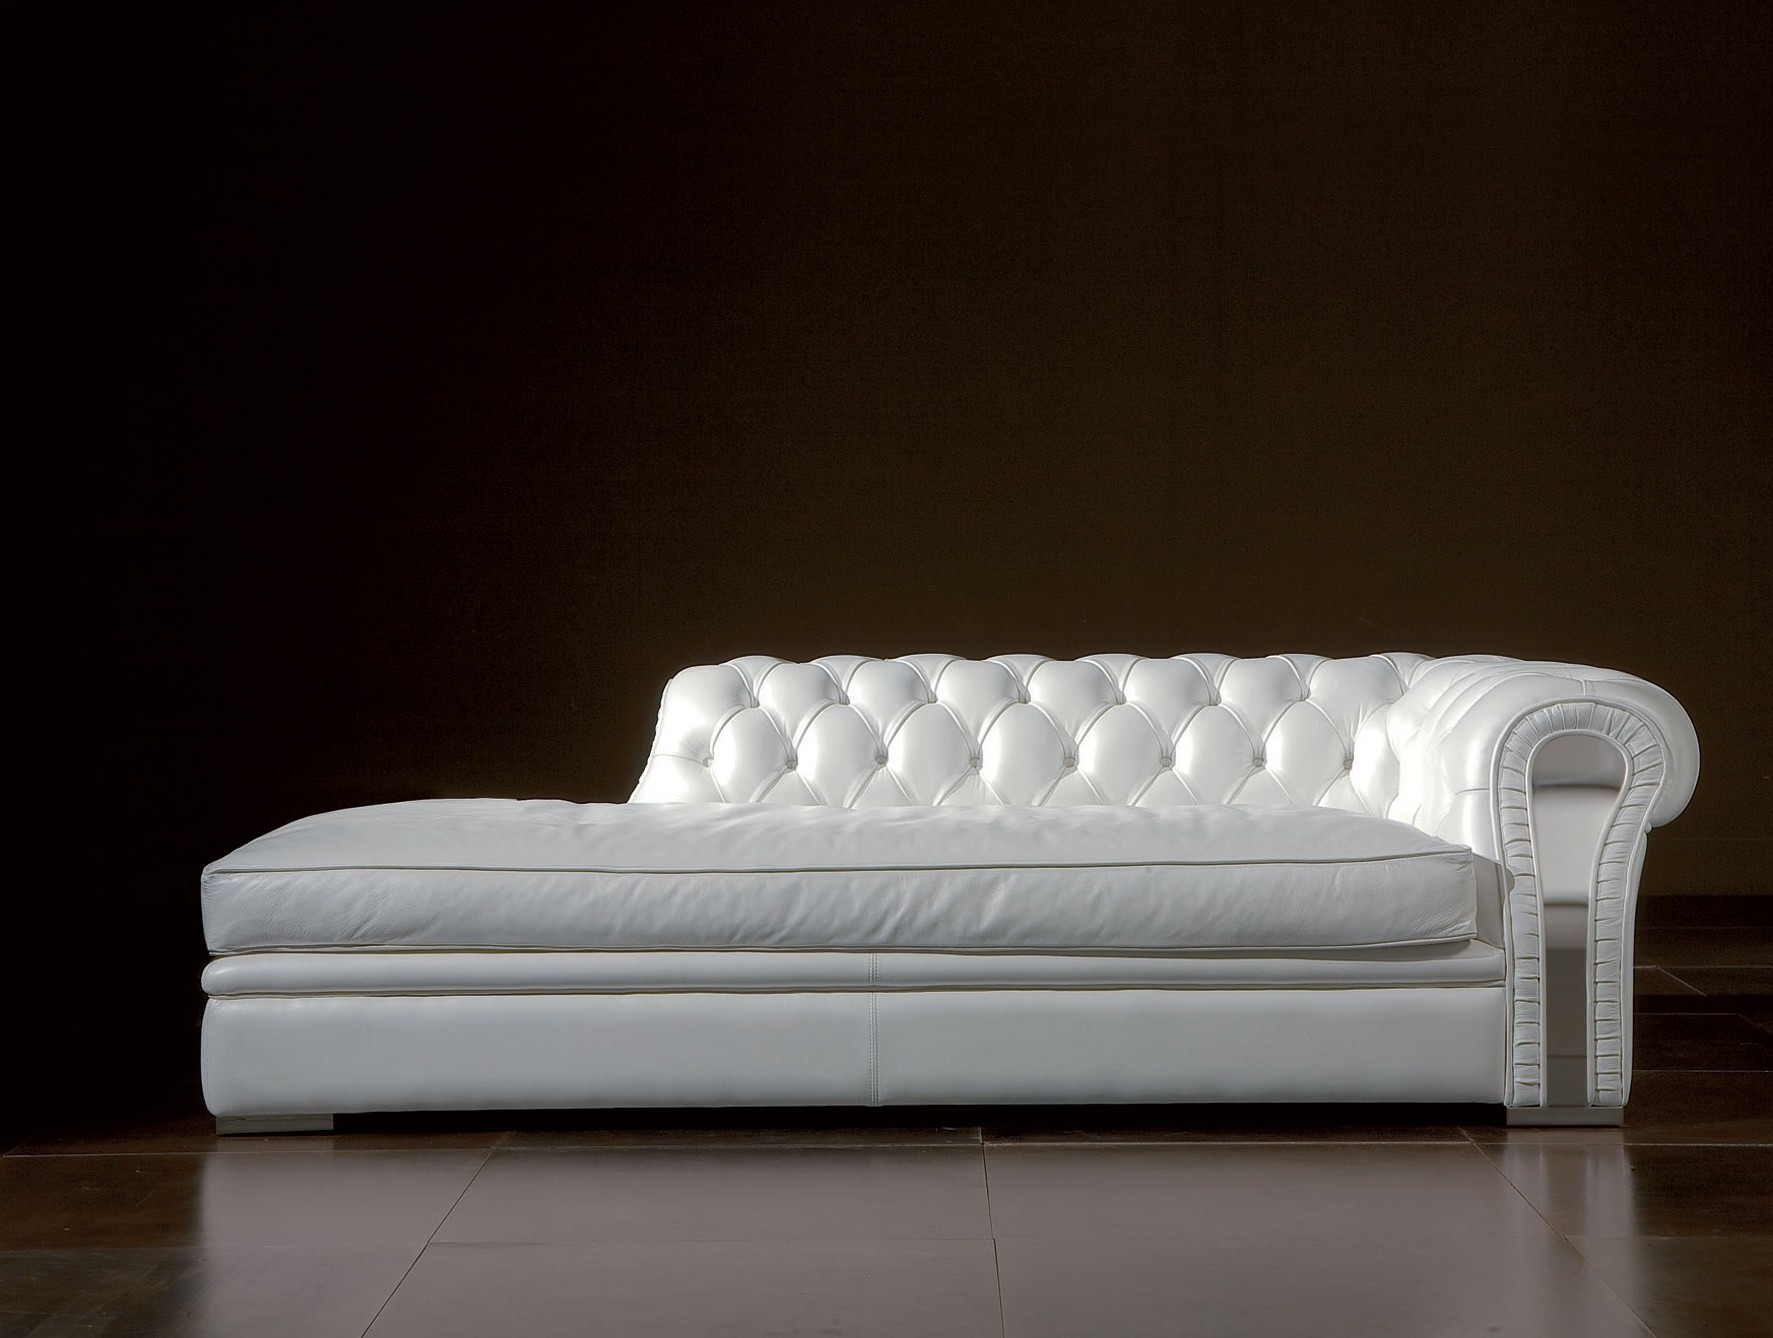 Top 15 of white leather chaise lounges 2